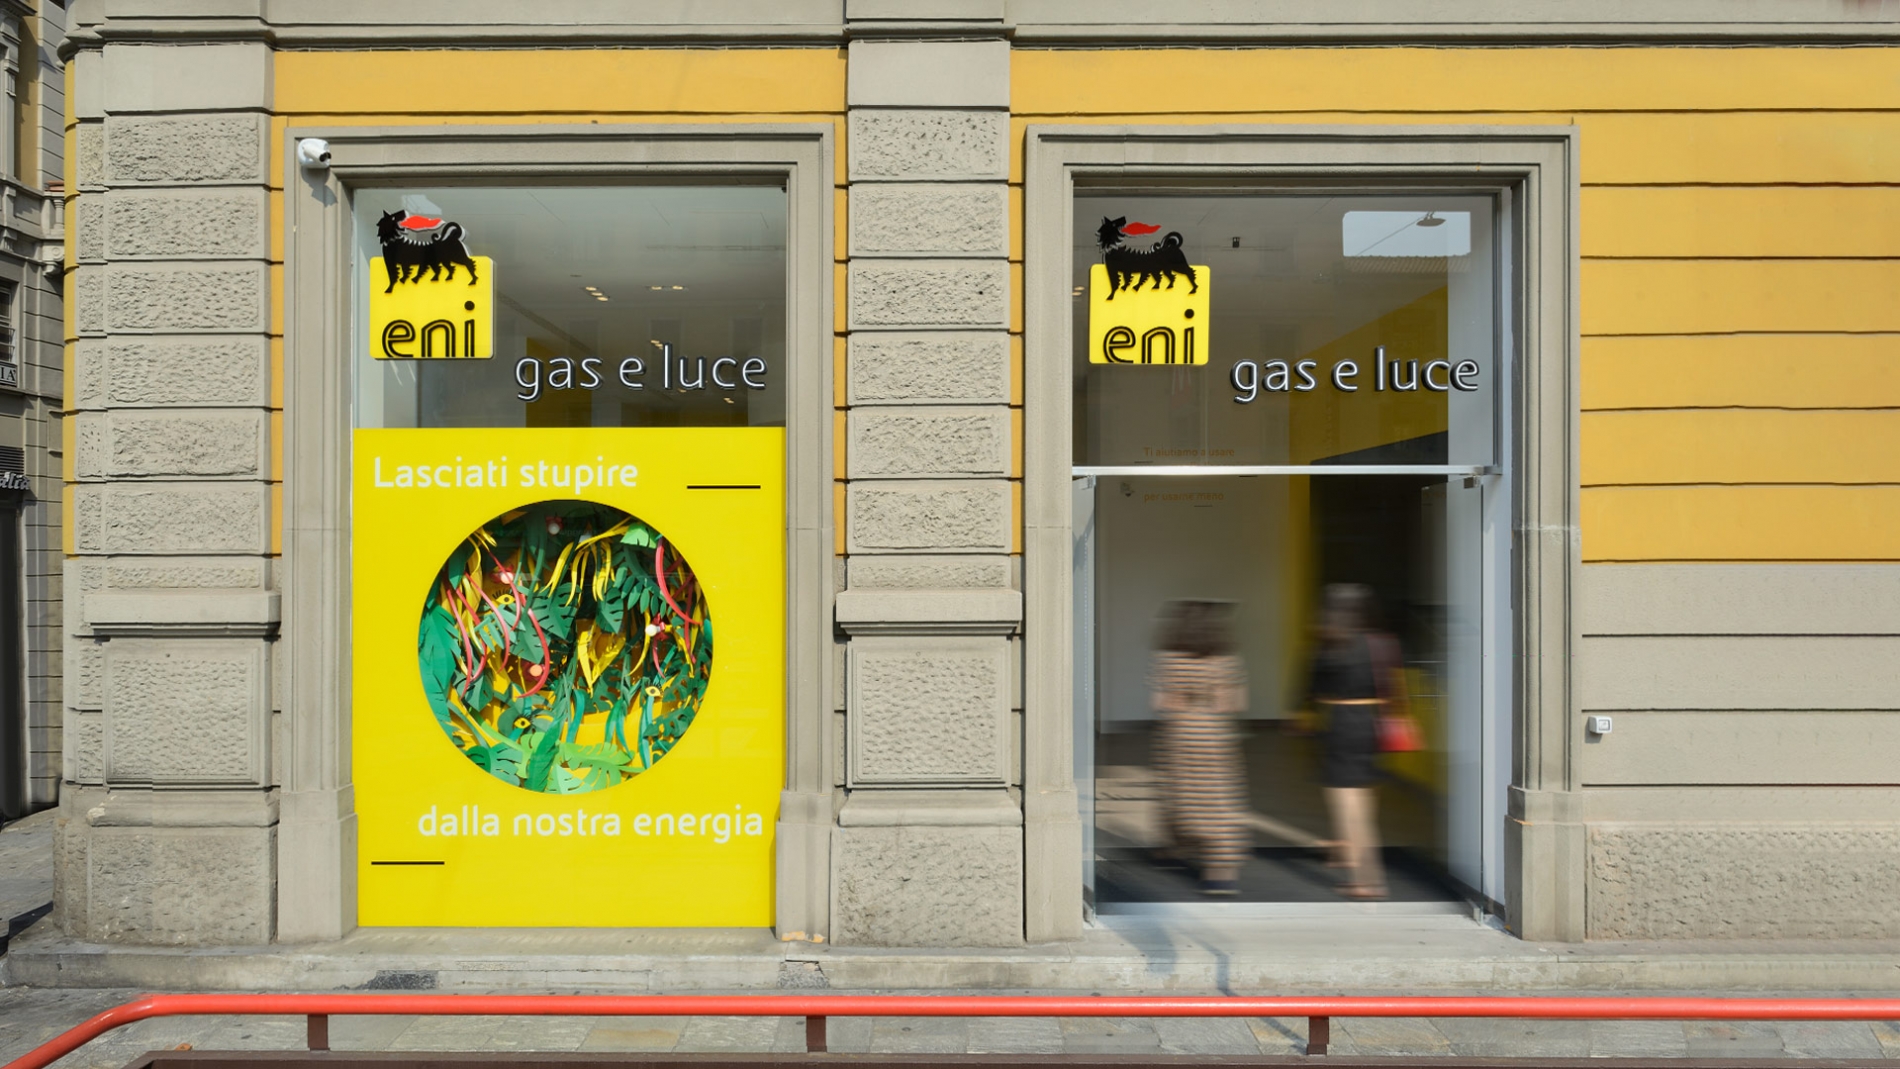 Building the energy market of the future, with Eni gas e luce.